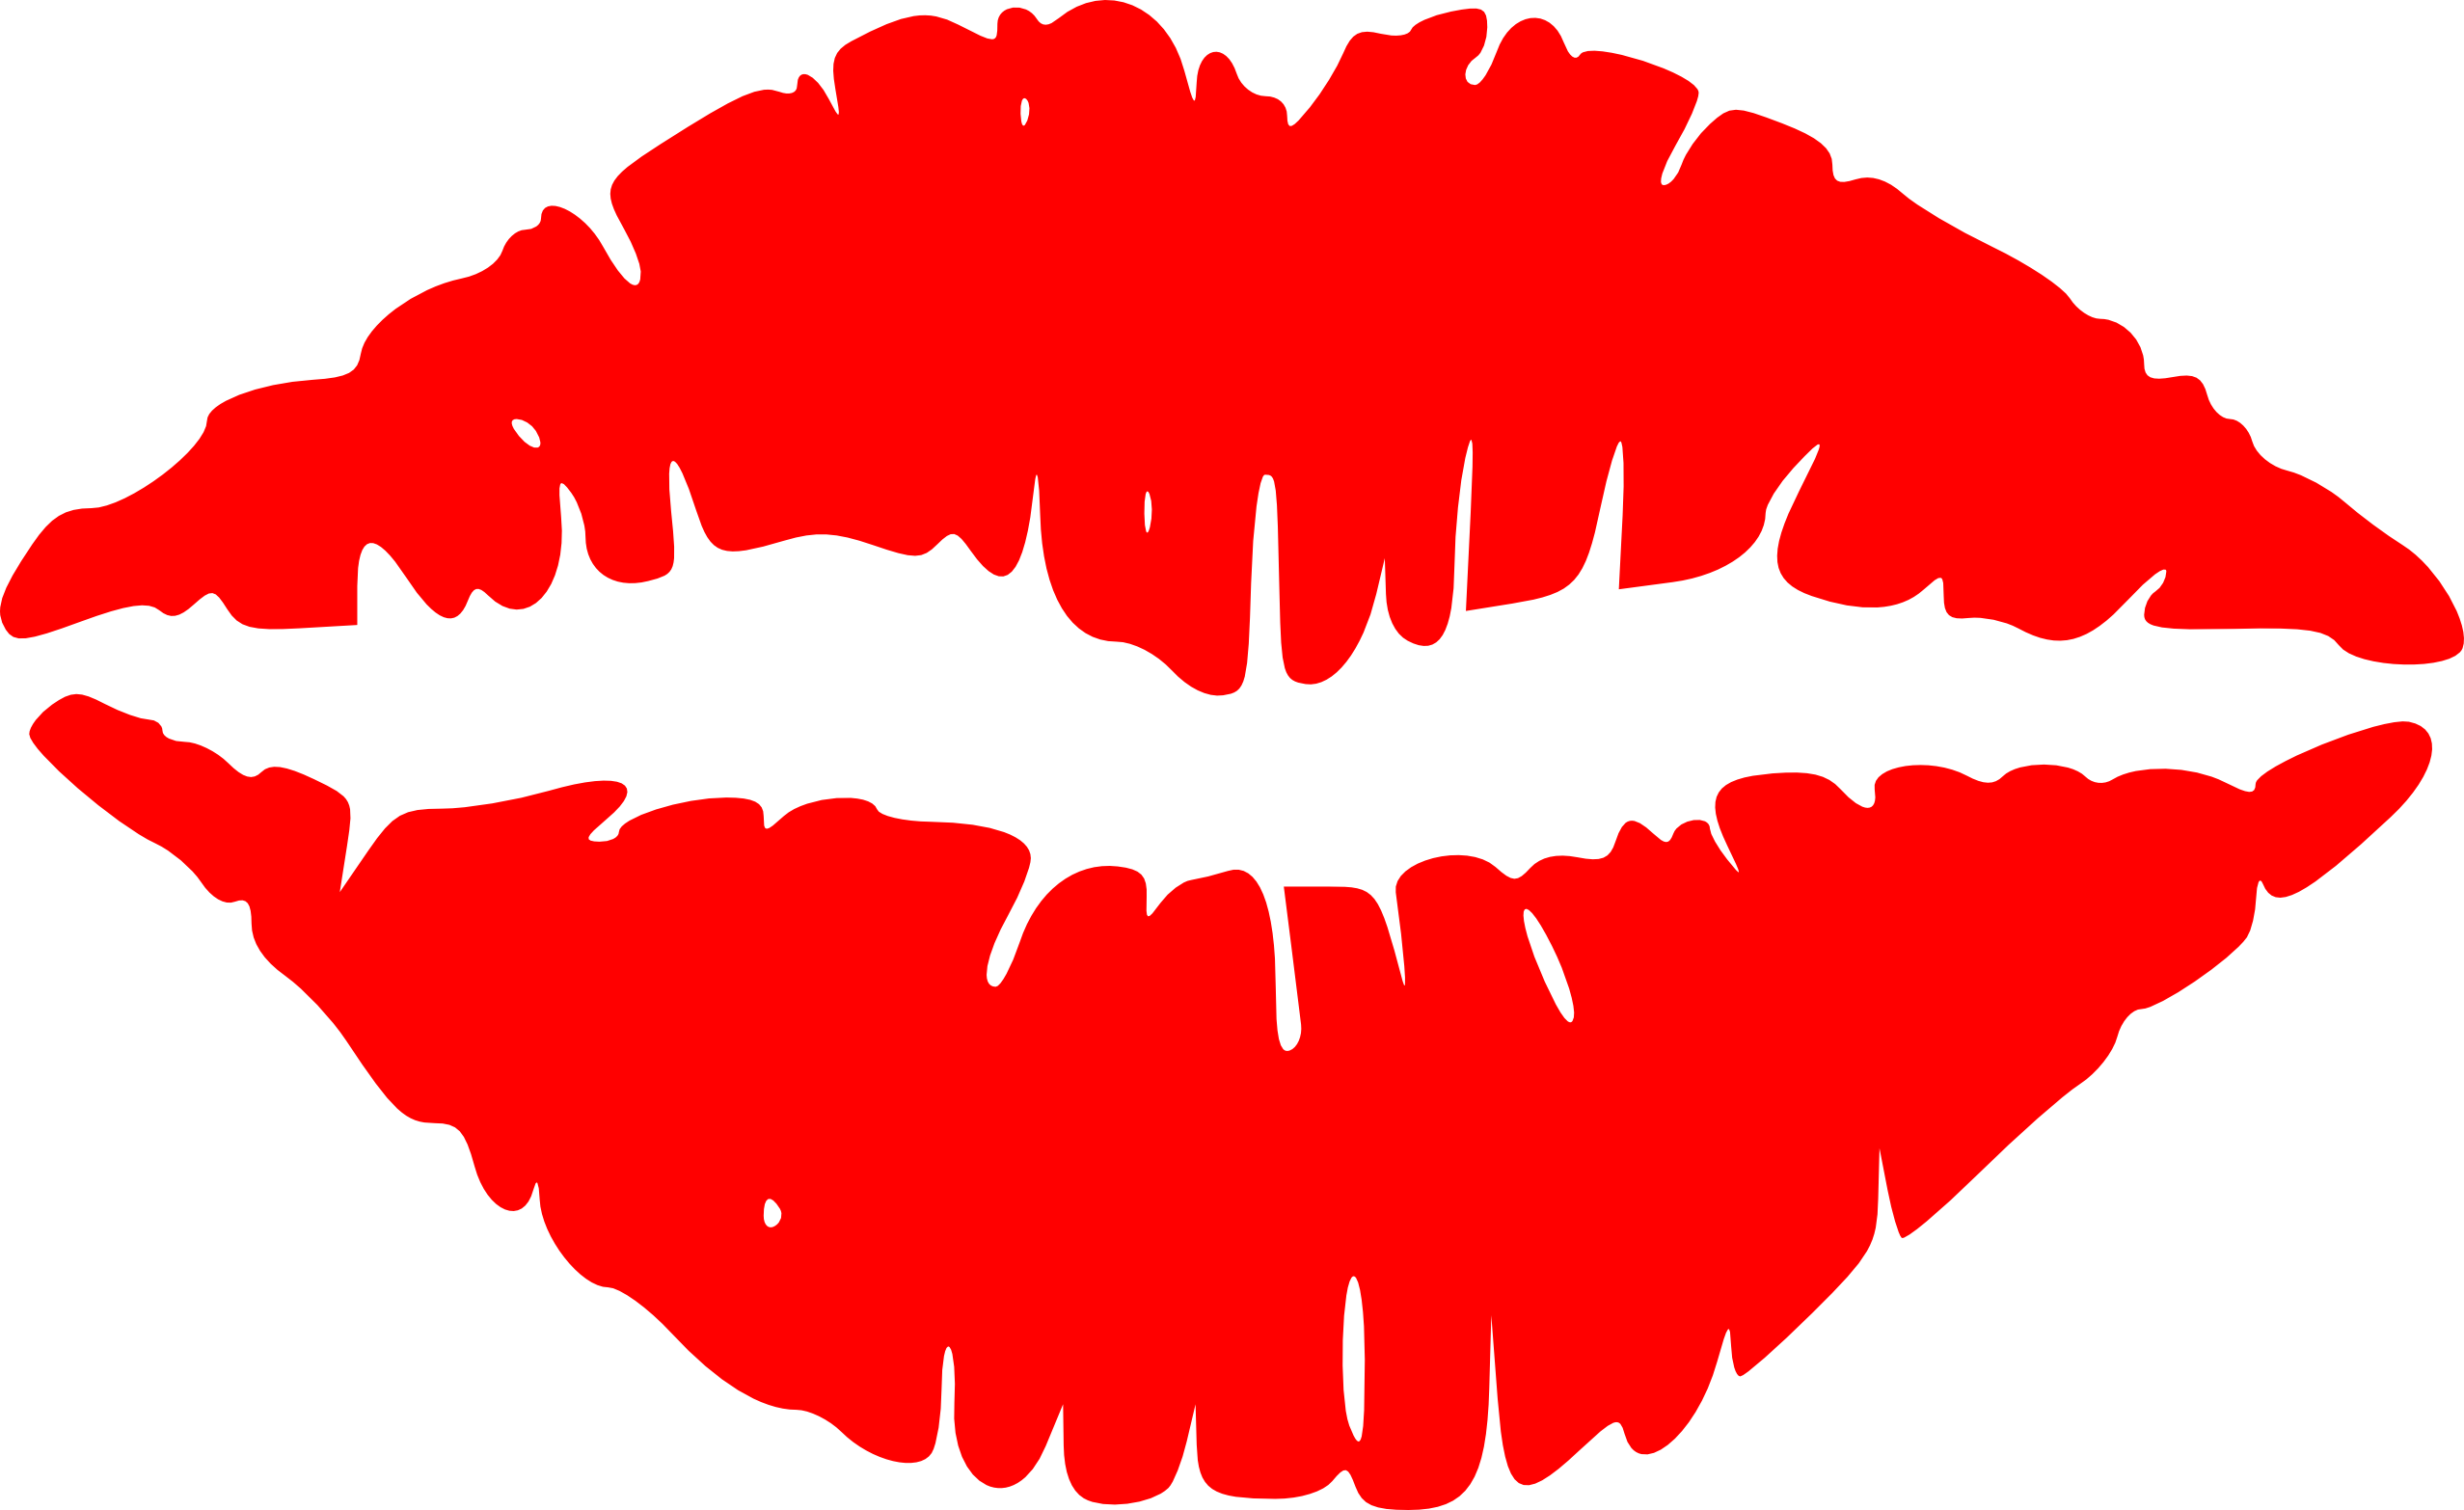 mouth clipart lip